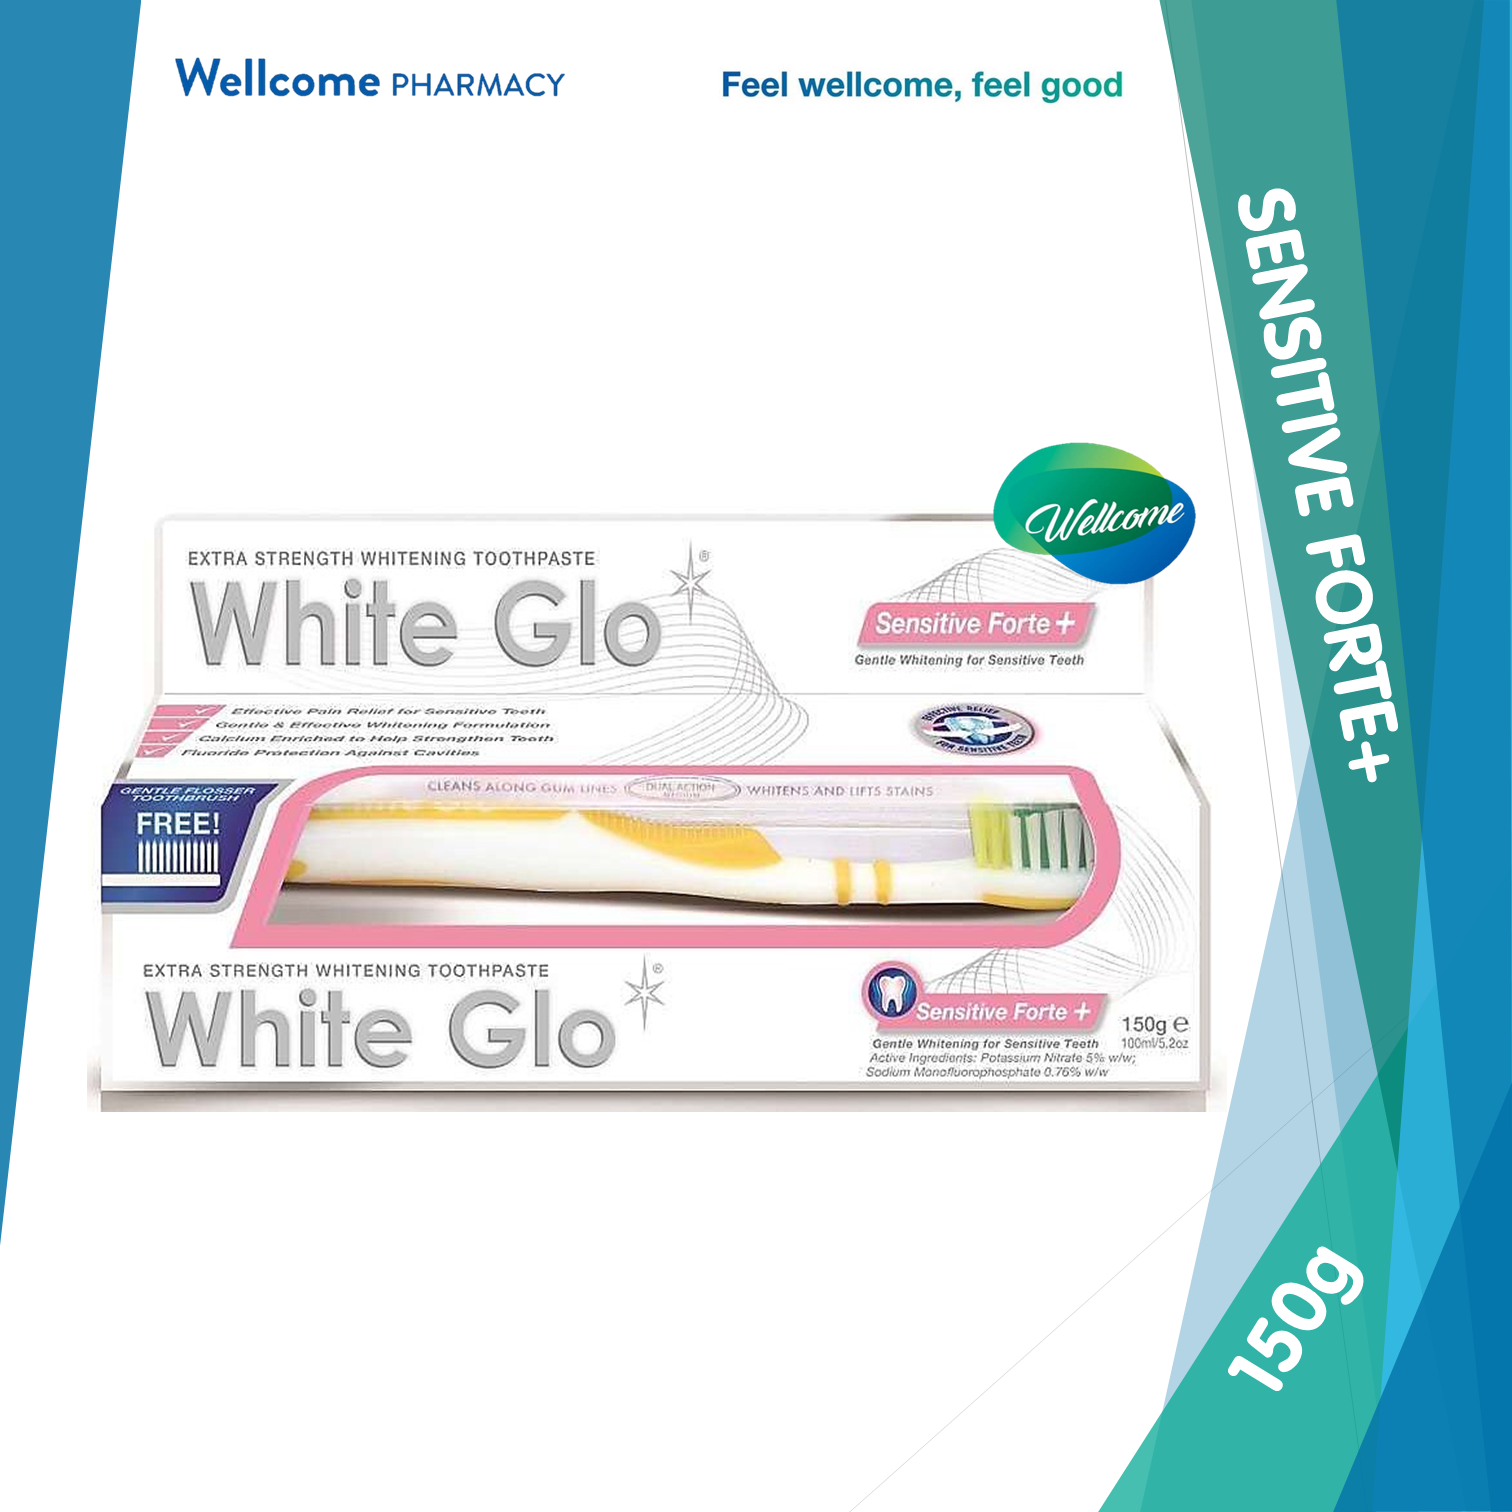 White Glo Sensitive Forte + Whitening Toothpaste - 150g.png